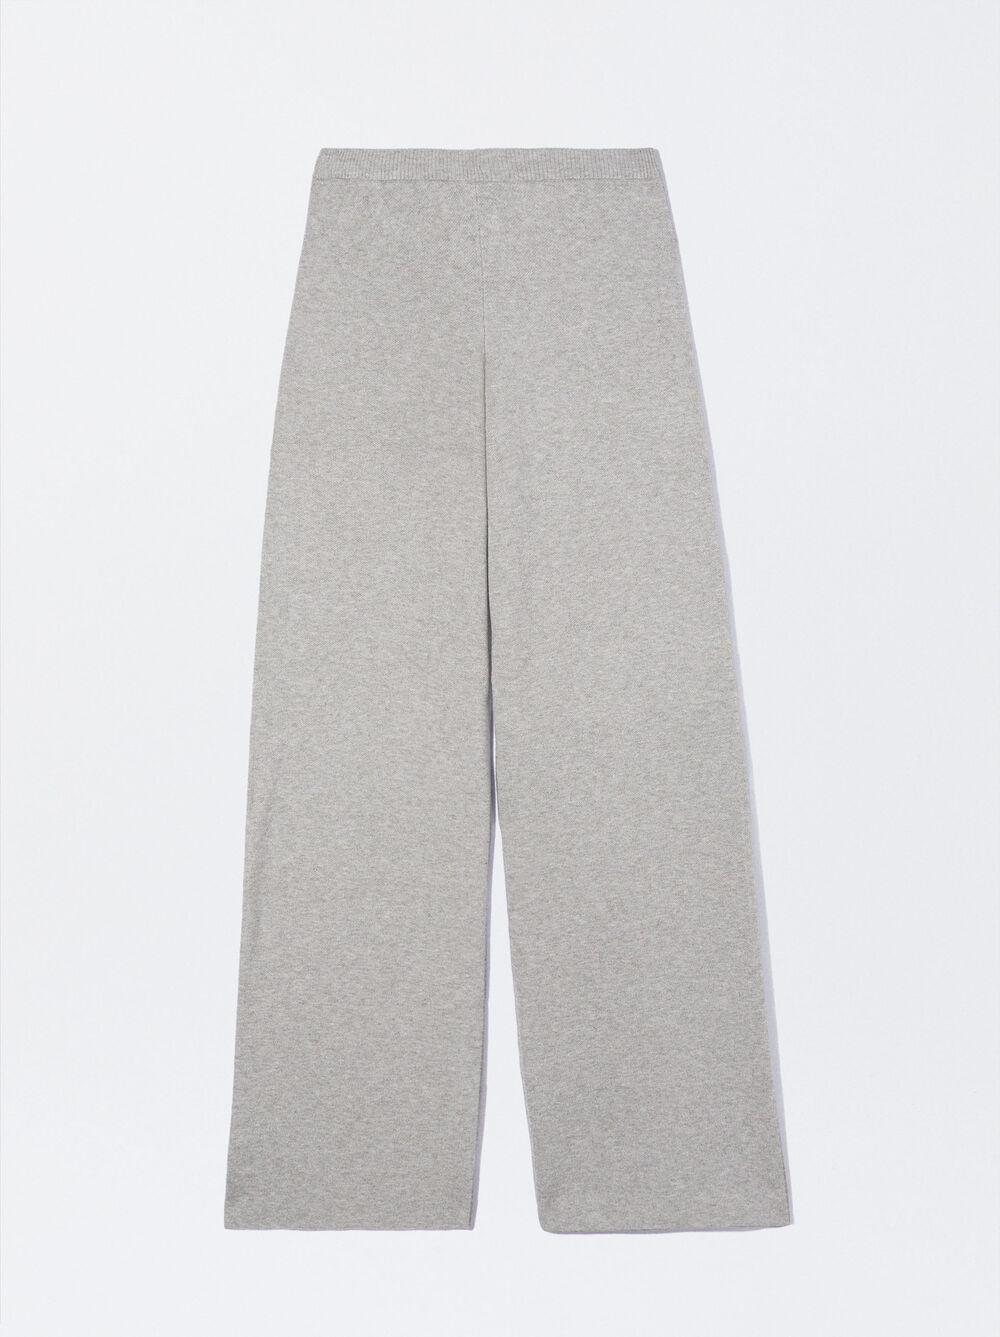 Knit Trousers